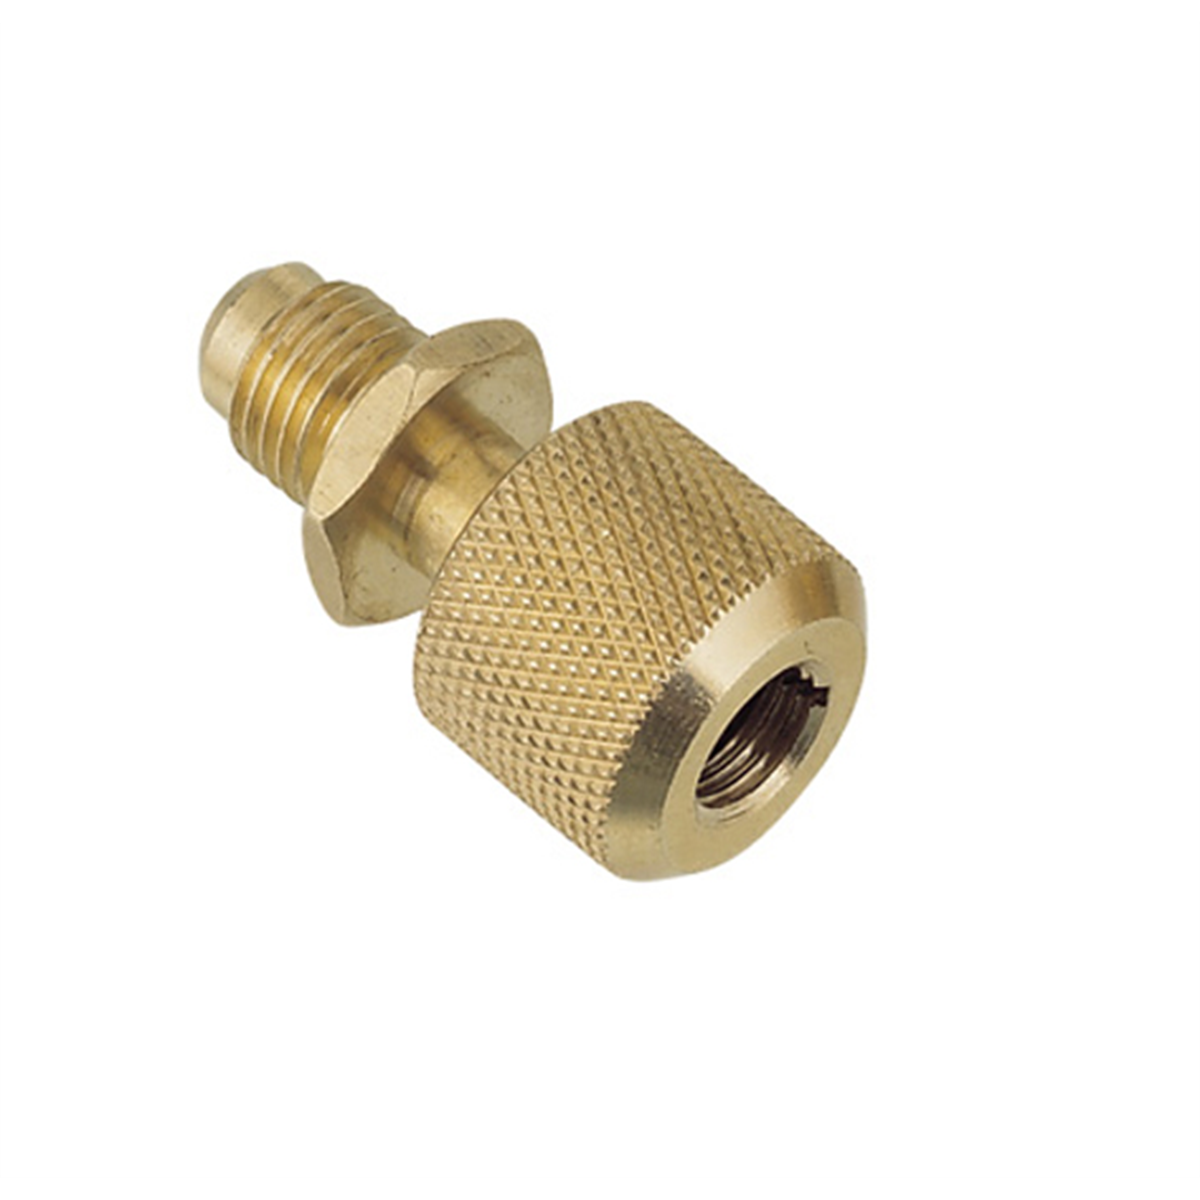 R134a Straight Automatic Shut-Off Valve 1/2 x 1/2 Inch ACME